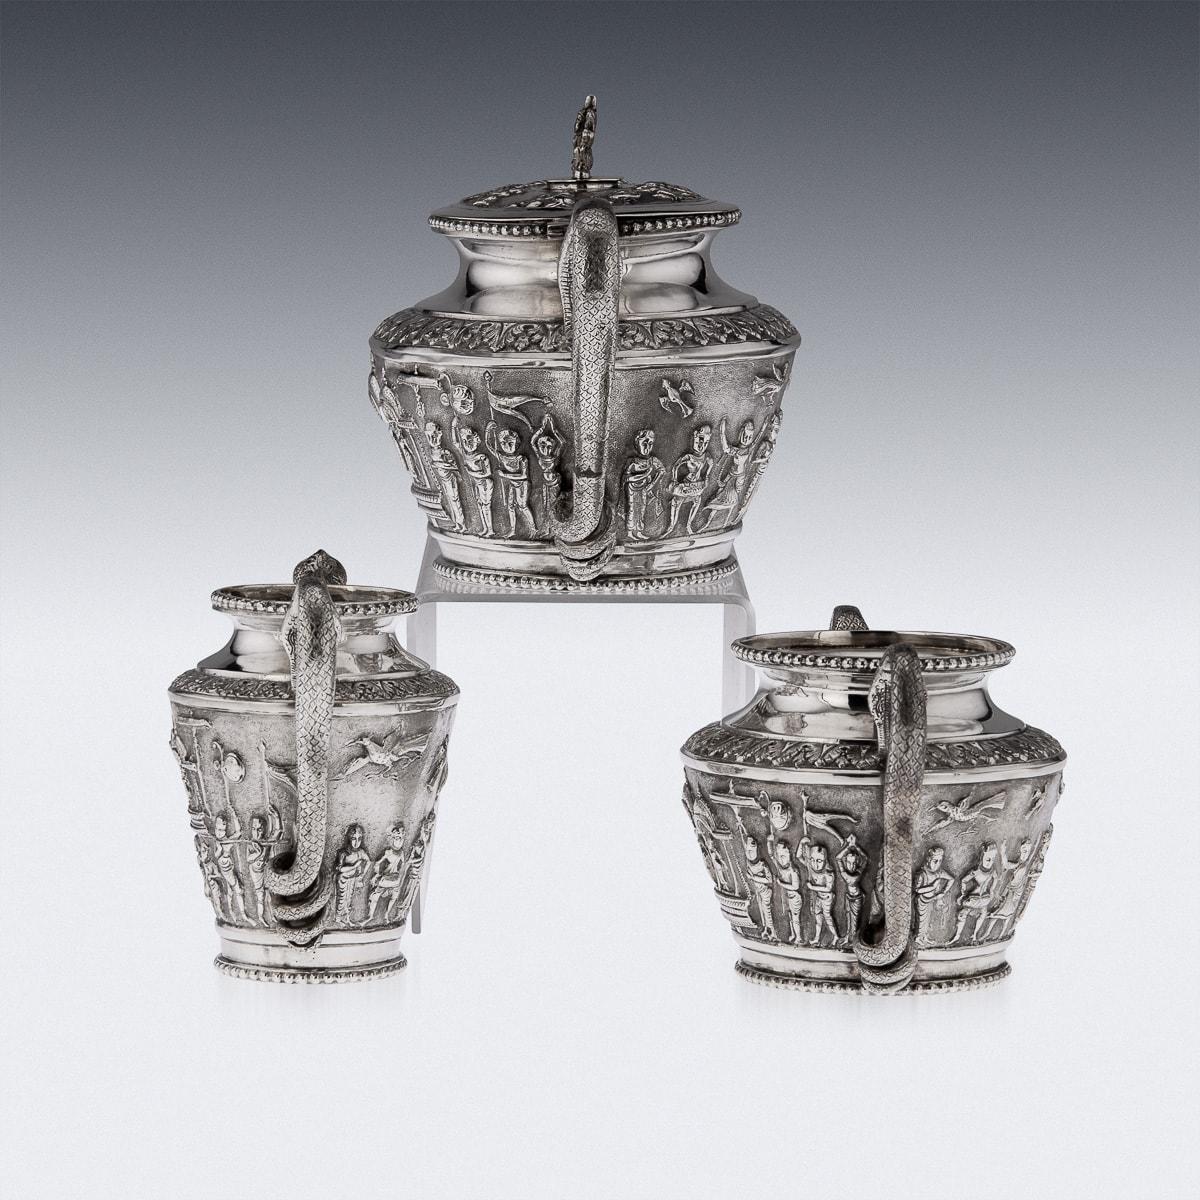 Antique 19th Century Indian Colonial solid silver three-piece tea set, comprising of teapot, sugar bowl, & cream jug, each straight tapered body is profusely and beautifully repousse' decorated with a religious processions with men carrying idols, a